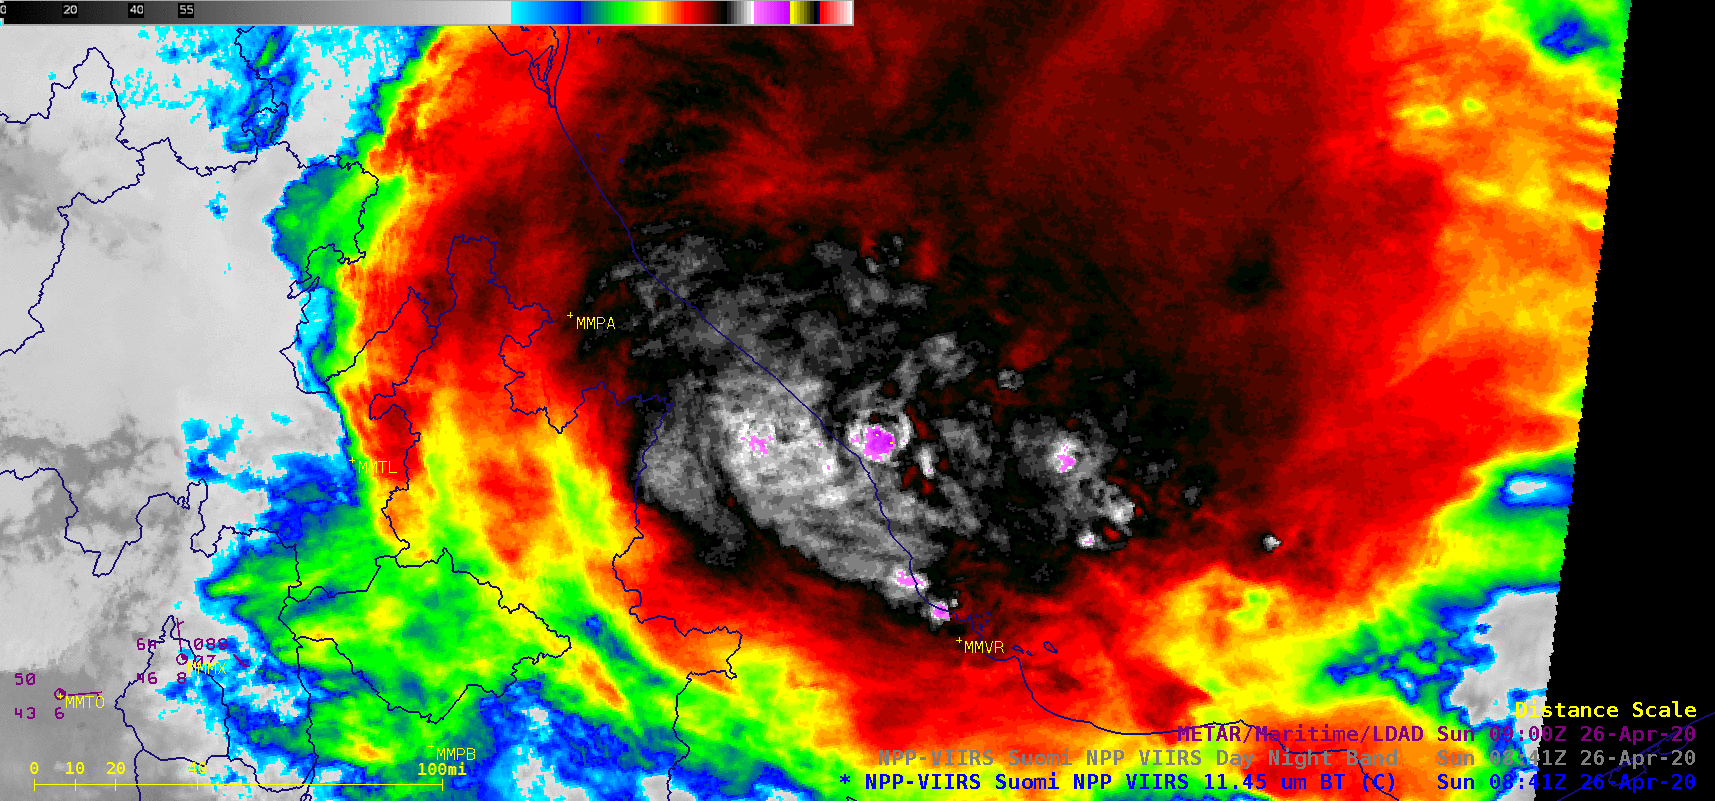 NOAA-20 VIIRS Infrared Window (11.45 µm) and Day/Night Band (0.7 µm) images at 0841 UTC [click to enlarge]